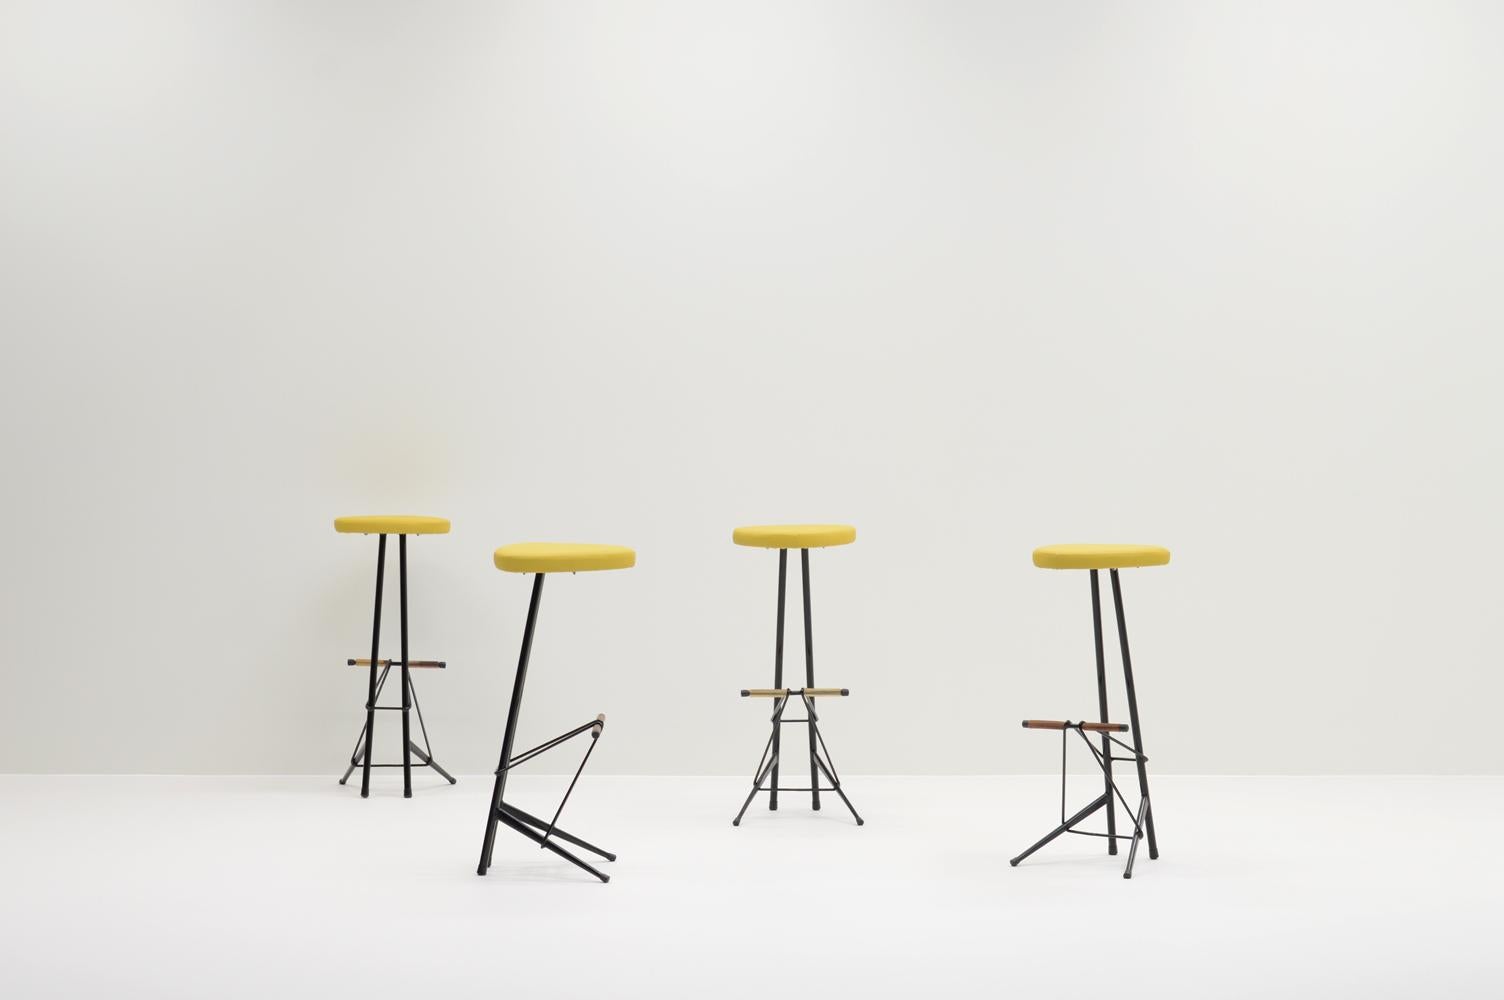 Rare bar stools by Willy van der Meeren for Tubax, Belgium 50s. The production was limited which makes these stools hard to find. The stools are refinished in the original black color, reupholstered with yellow skai leather and have the original